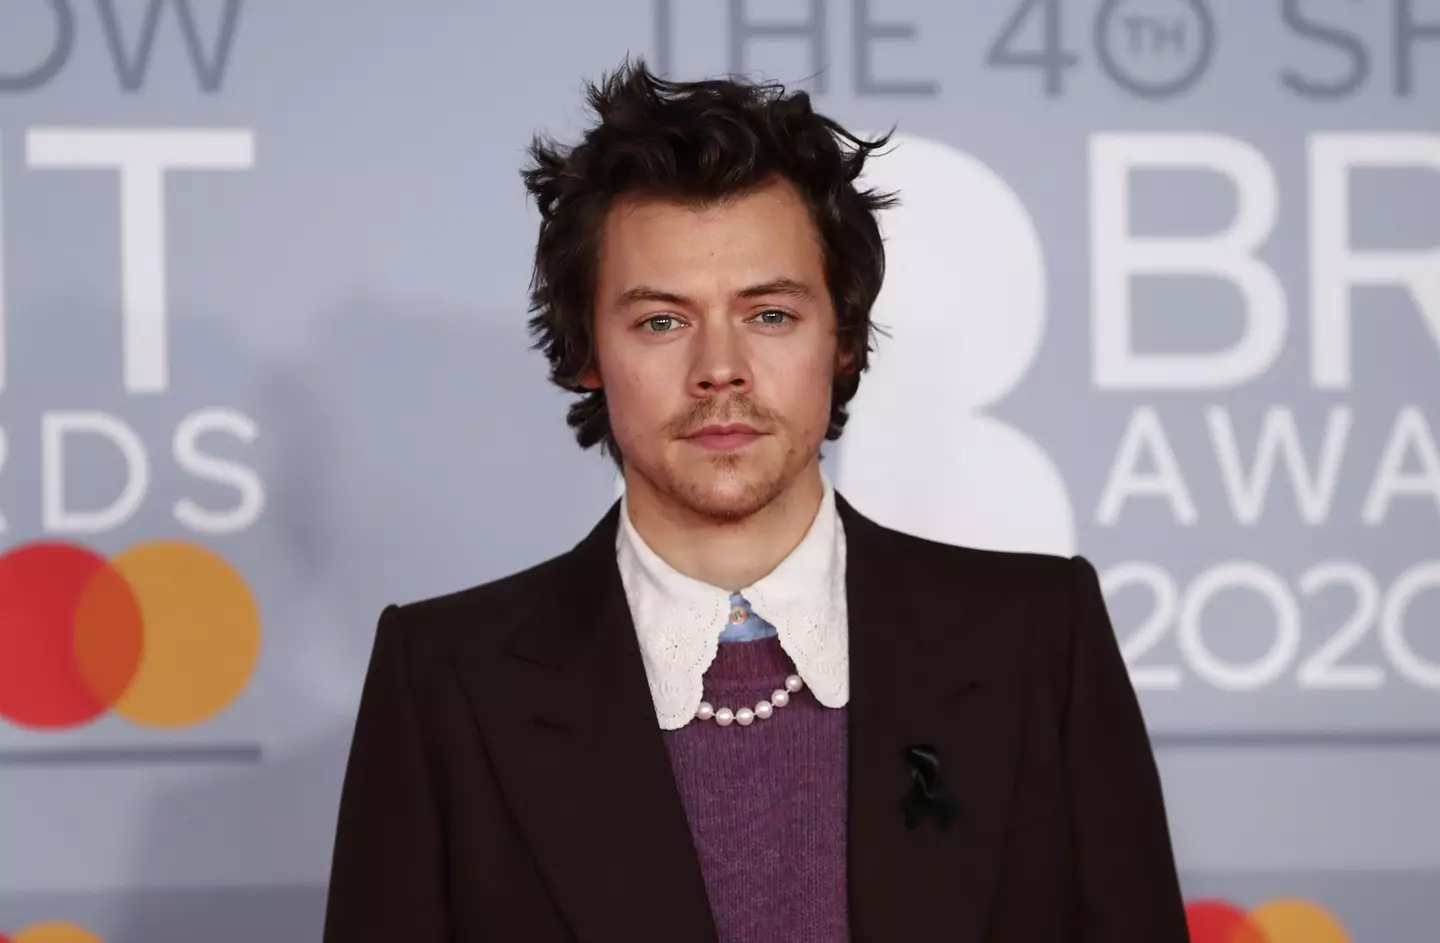 Harry Styles at the 2020 Brit Awards.